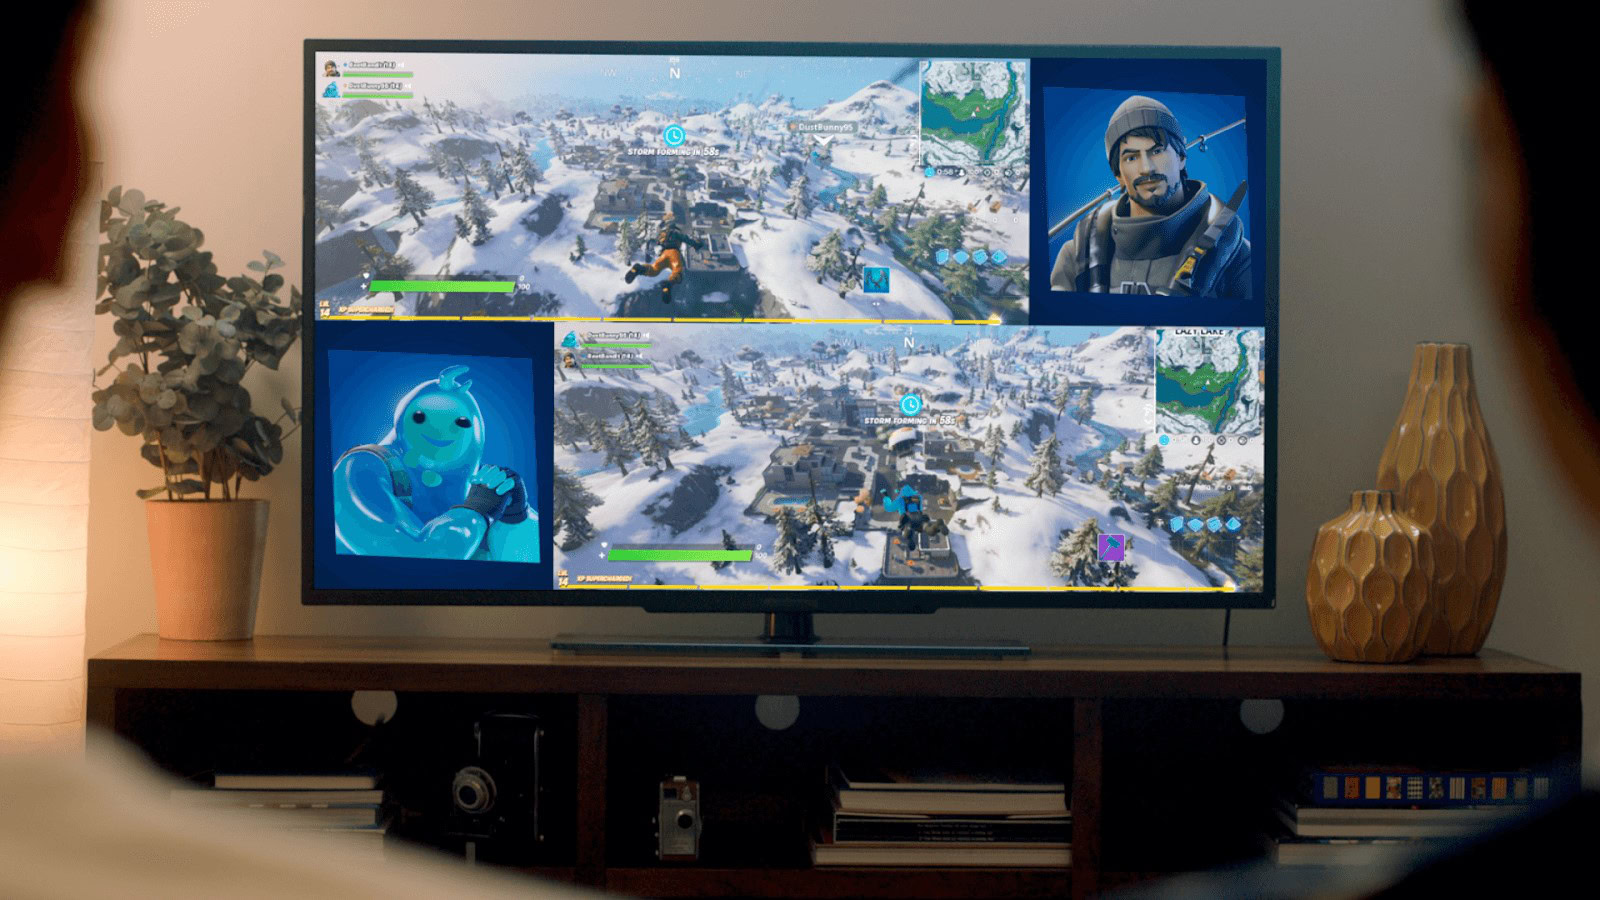 Fortnite Split Screen: How to Play on PS4 and Xbox One